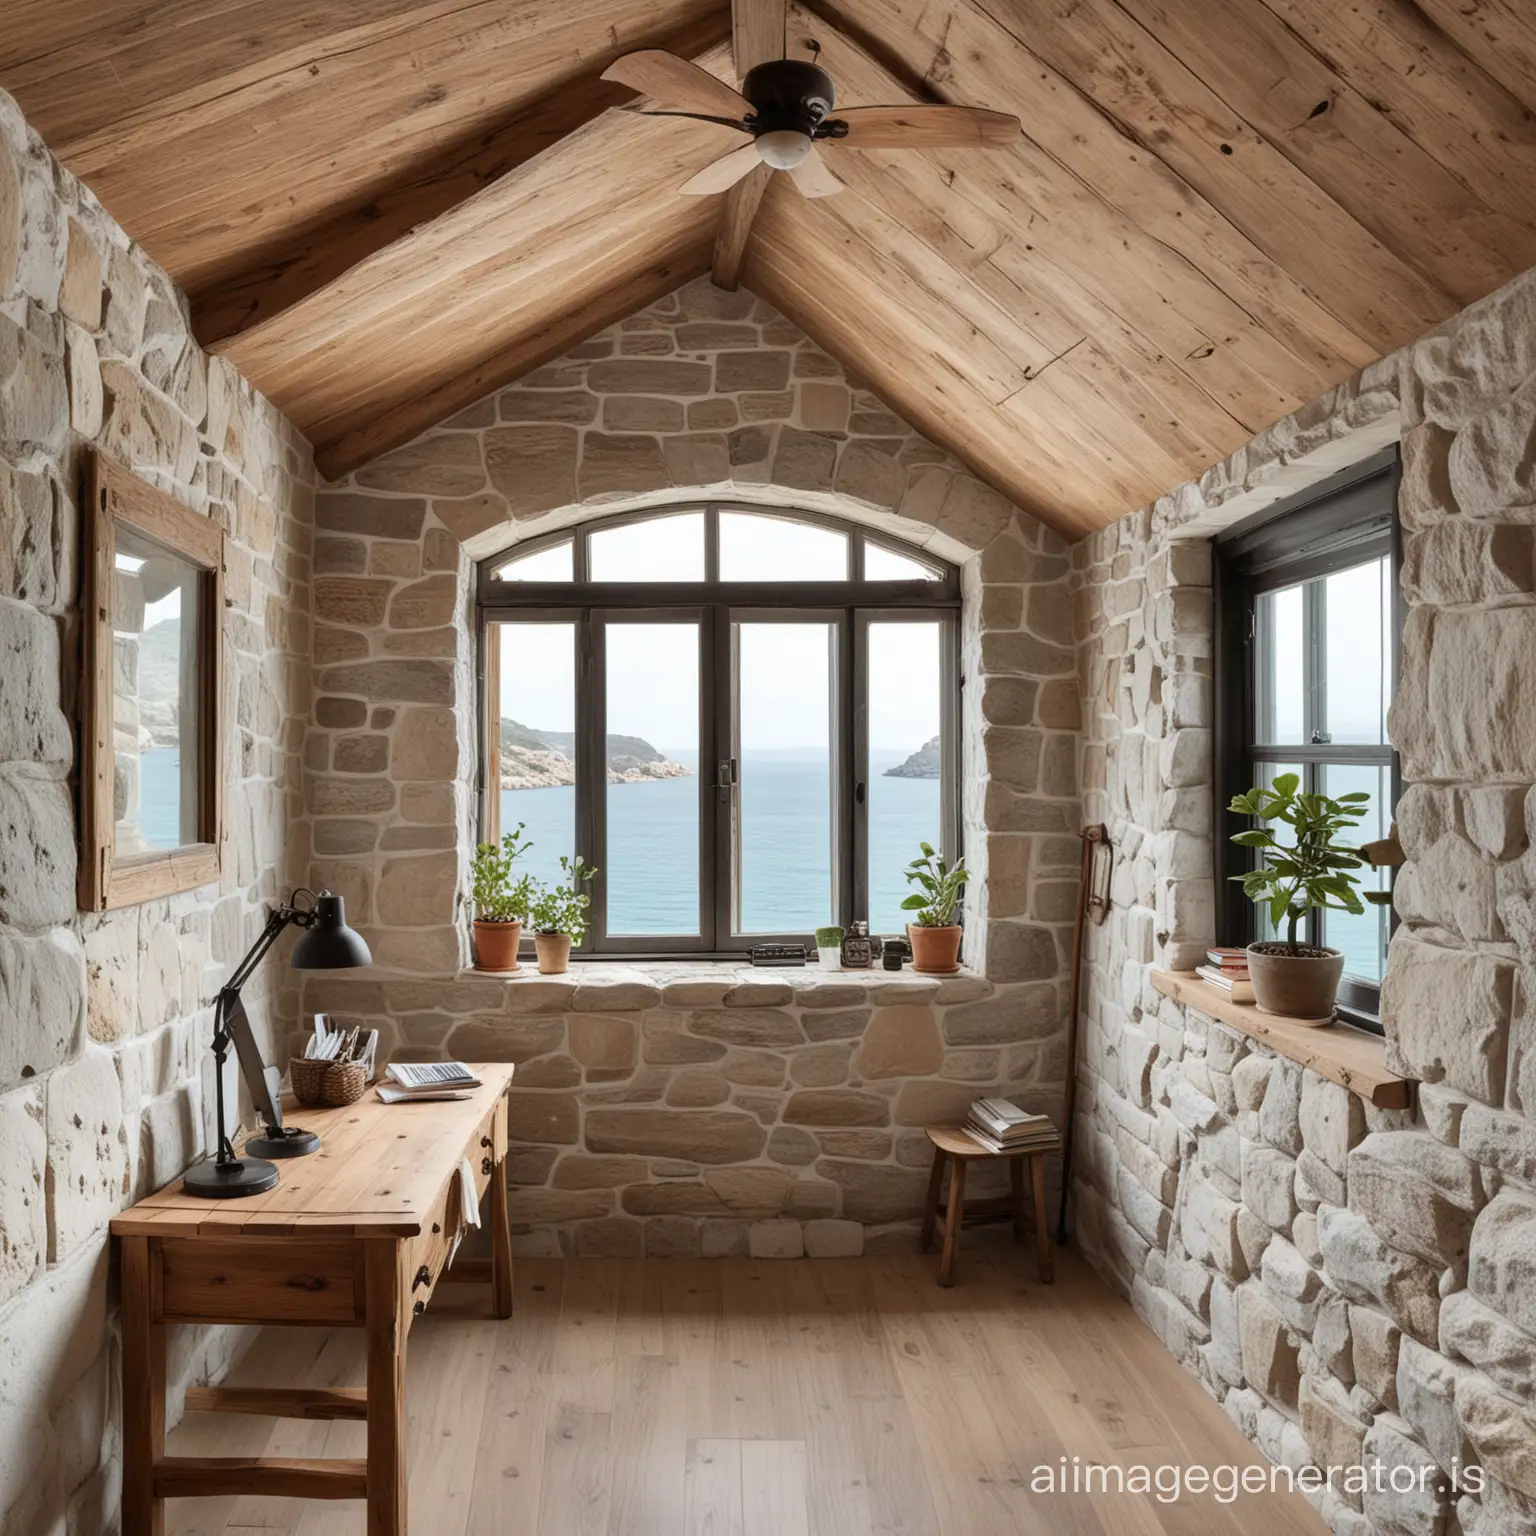 Rustic 160 square foot office in a stone sea cottage with a very small long window along a white wall looking out towards the sea, high slanted wood ceiling with a fan